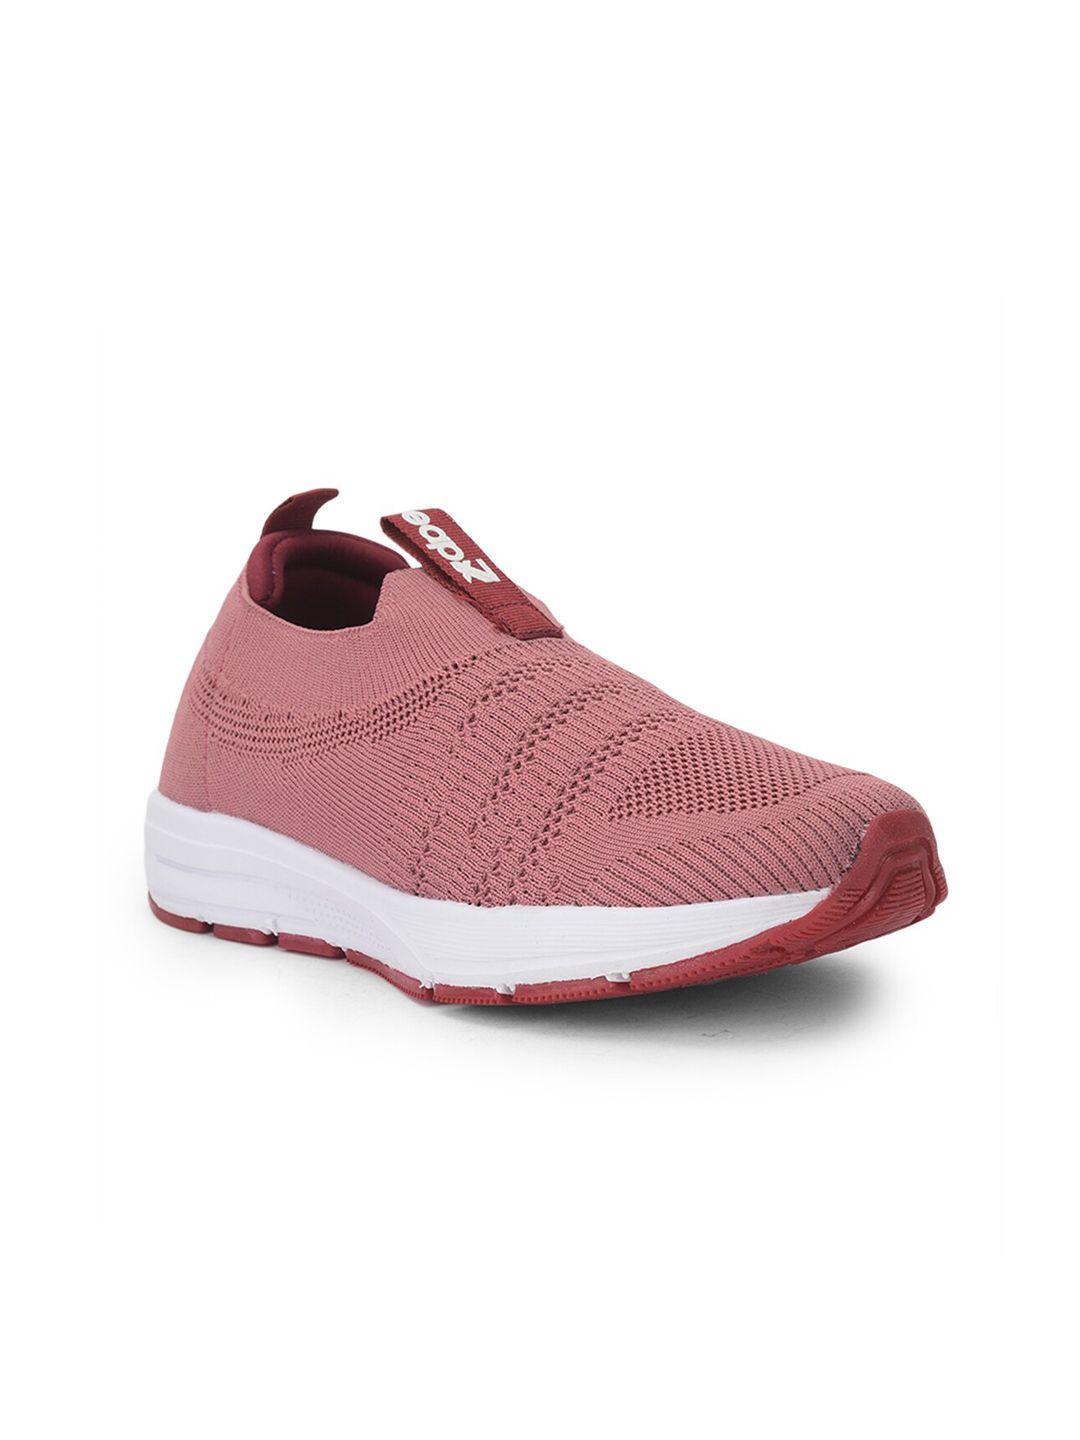 liberty-women-coral-running-non-marking-shoes